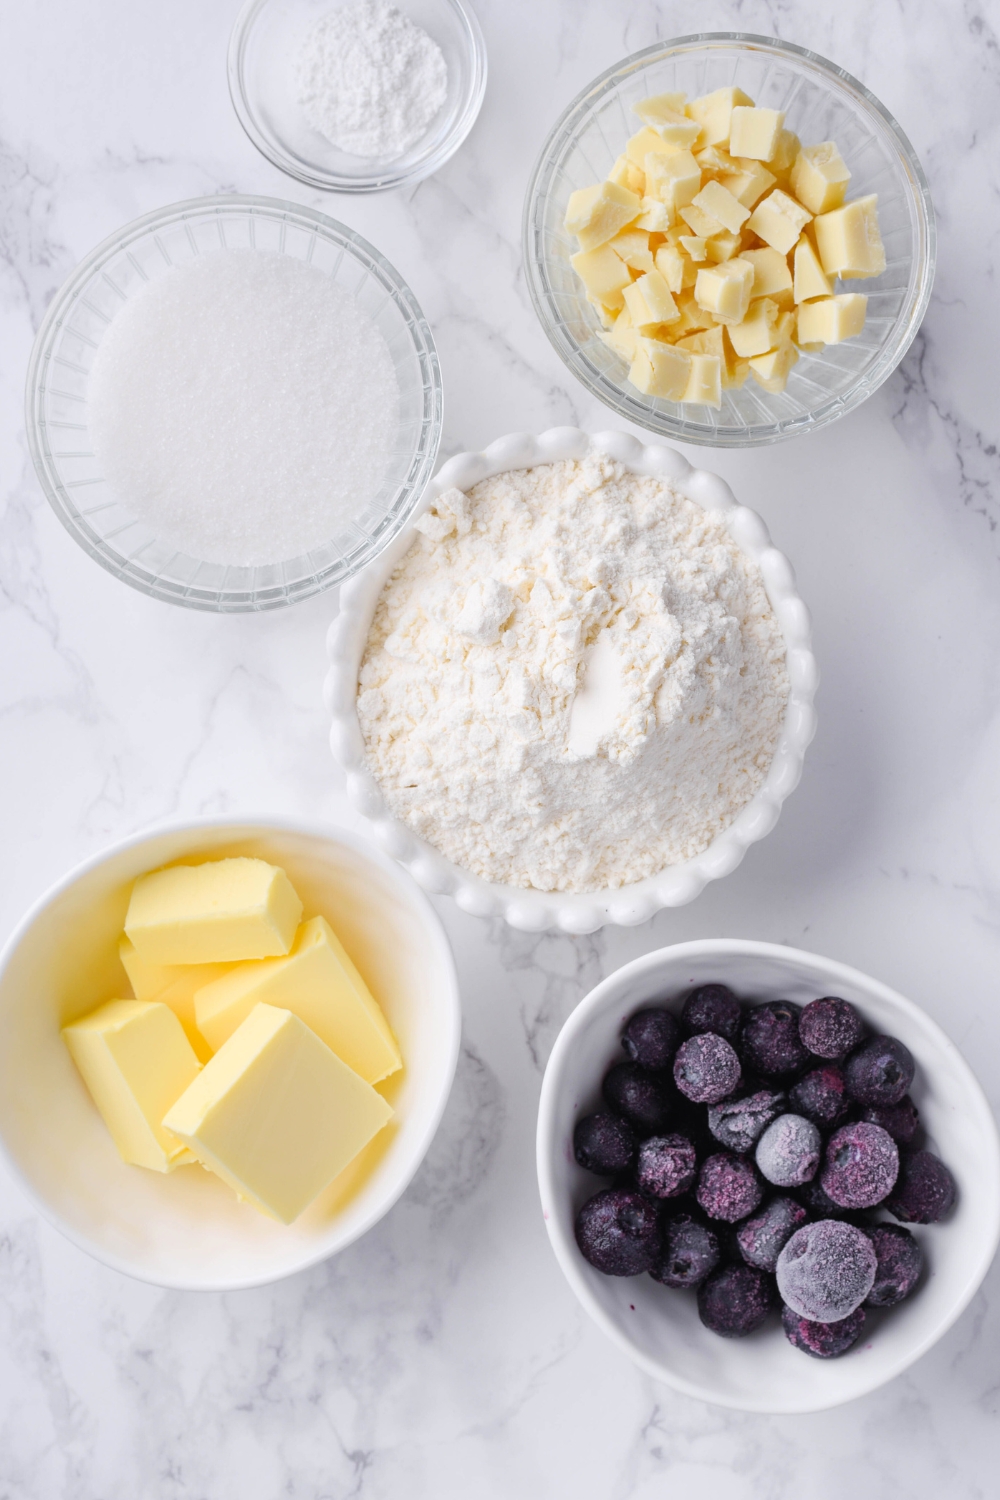 A countertop with flour, butter, blueberries, white chocolate chunks, sugar, and baking powder in separate bowls.